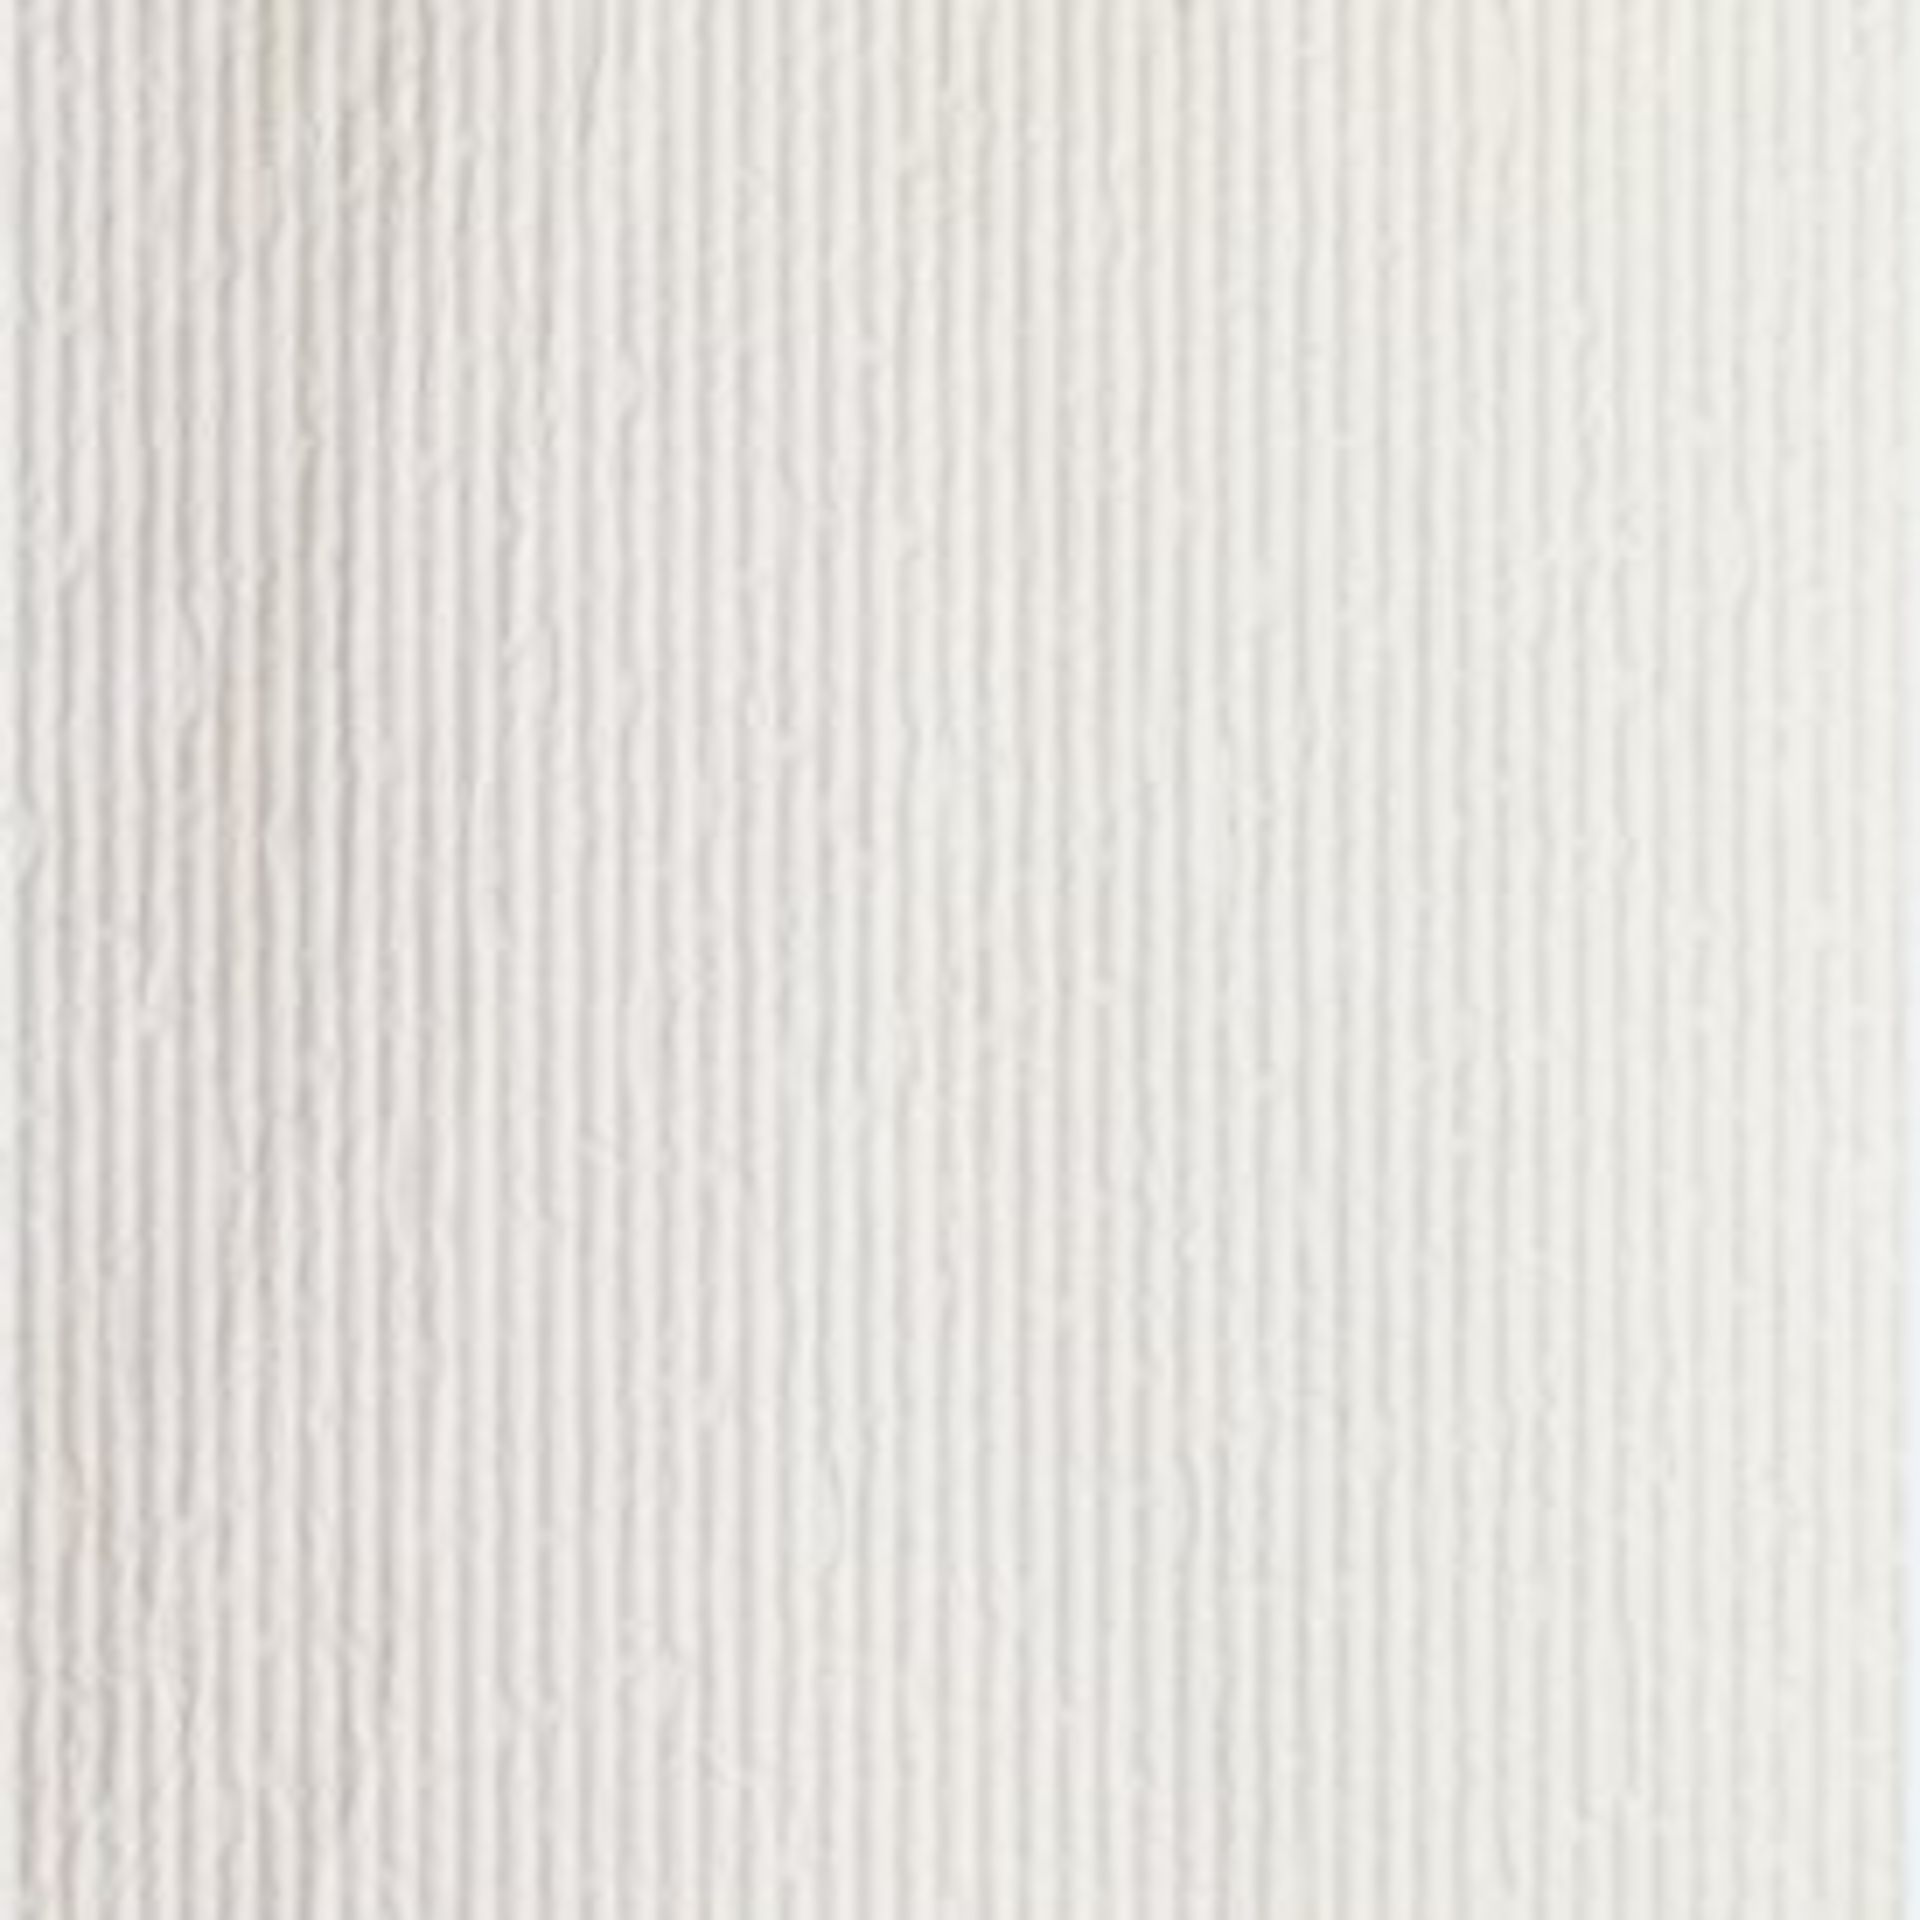 10x packs of 5 Johnsons 600x300mm Haven Sand decor textured wall and floor tiles , new, ref code